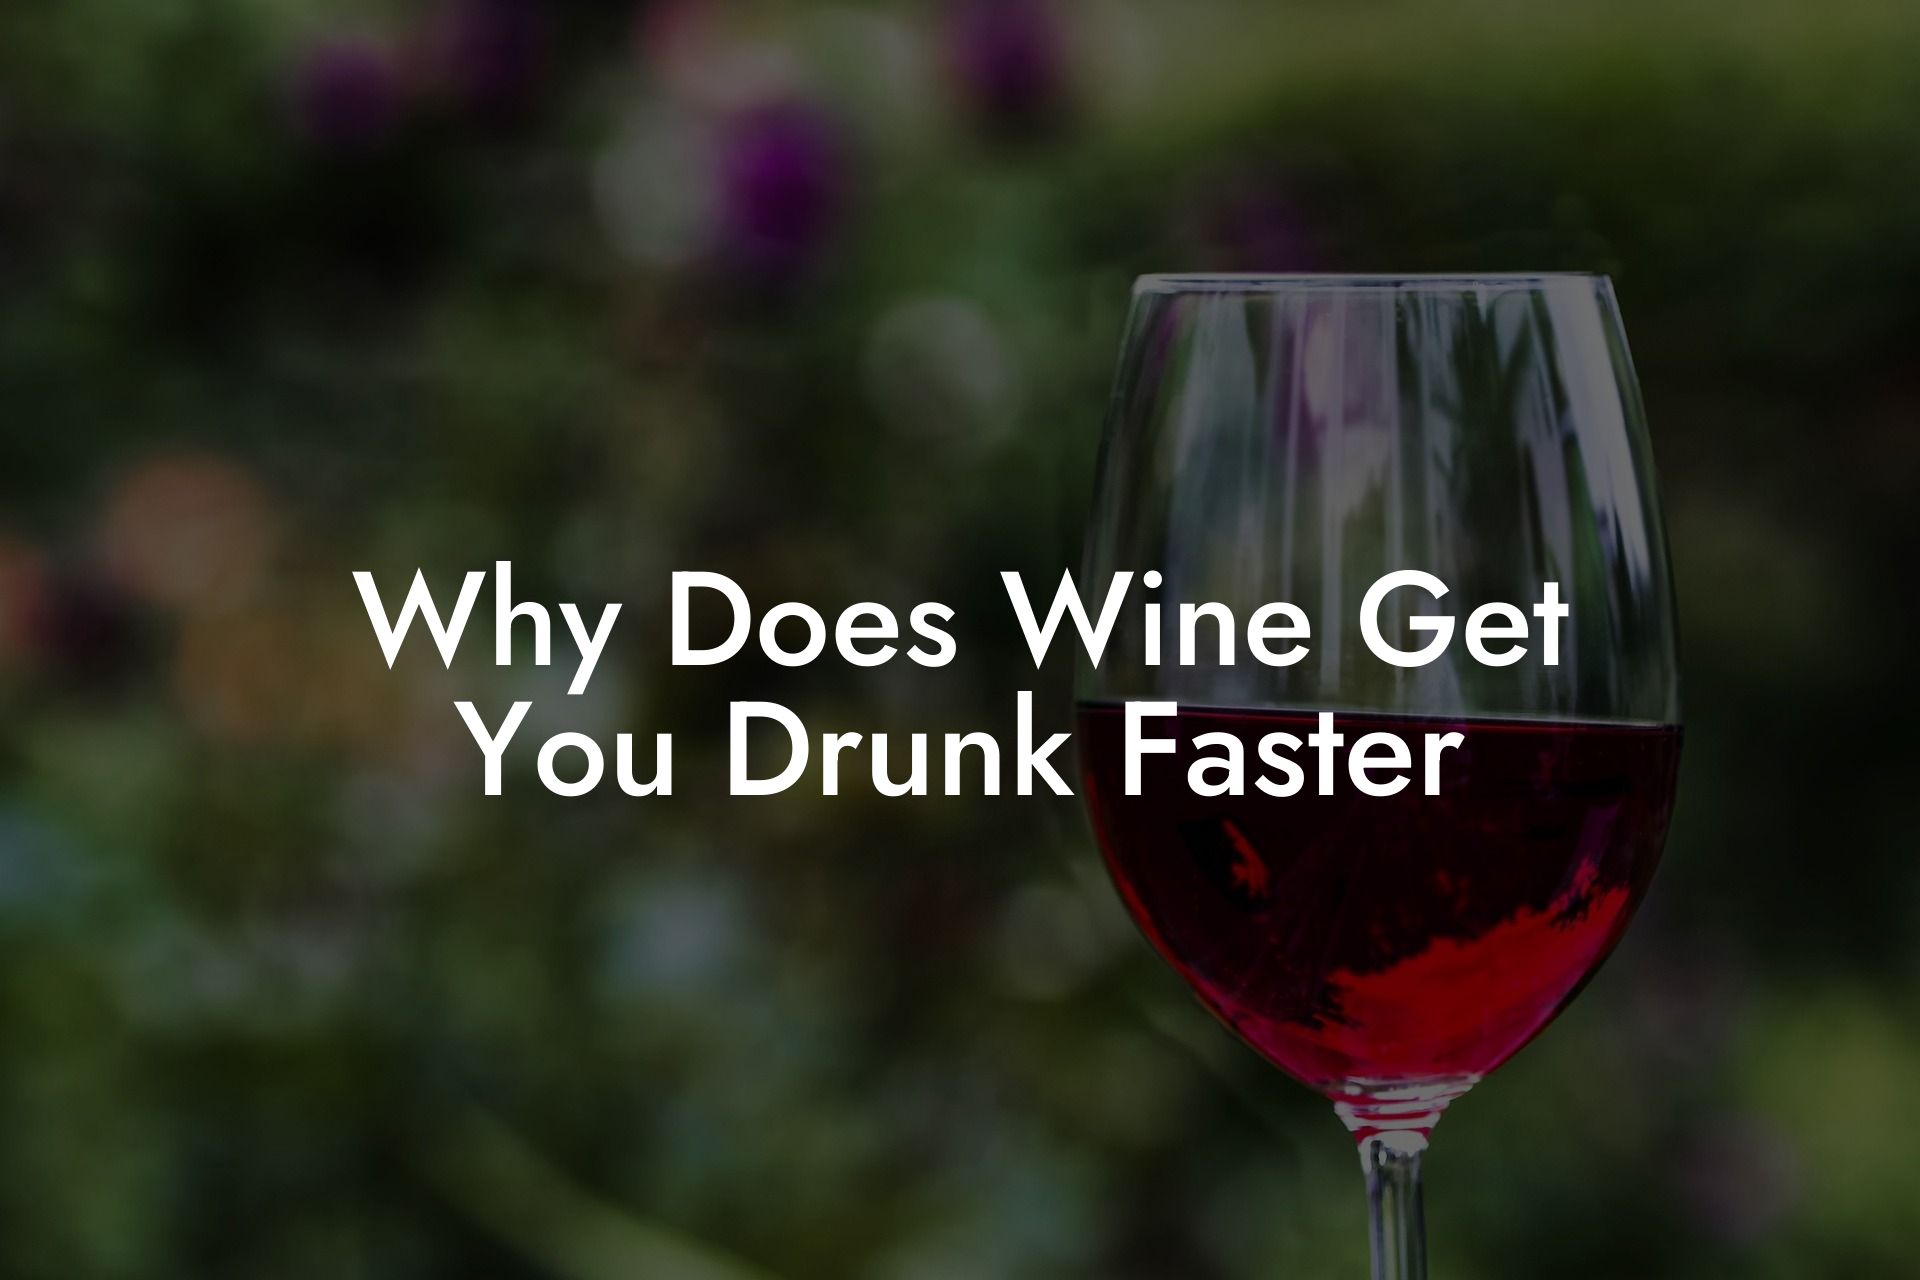 Why Does Wine Get You Drunk Faster